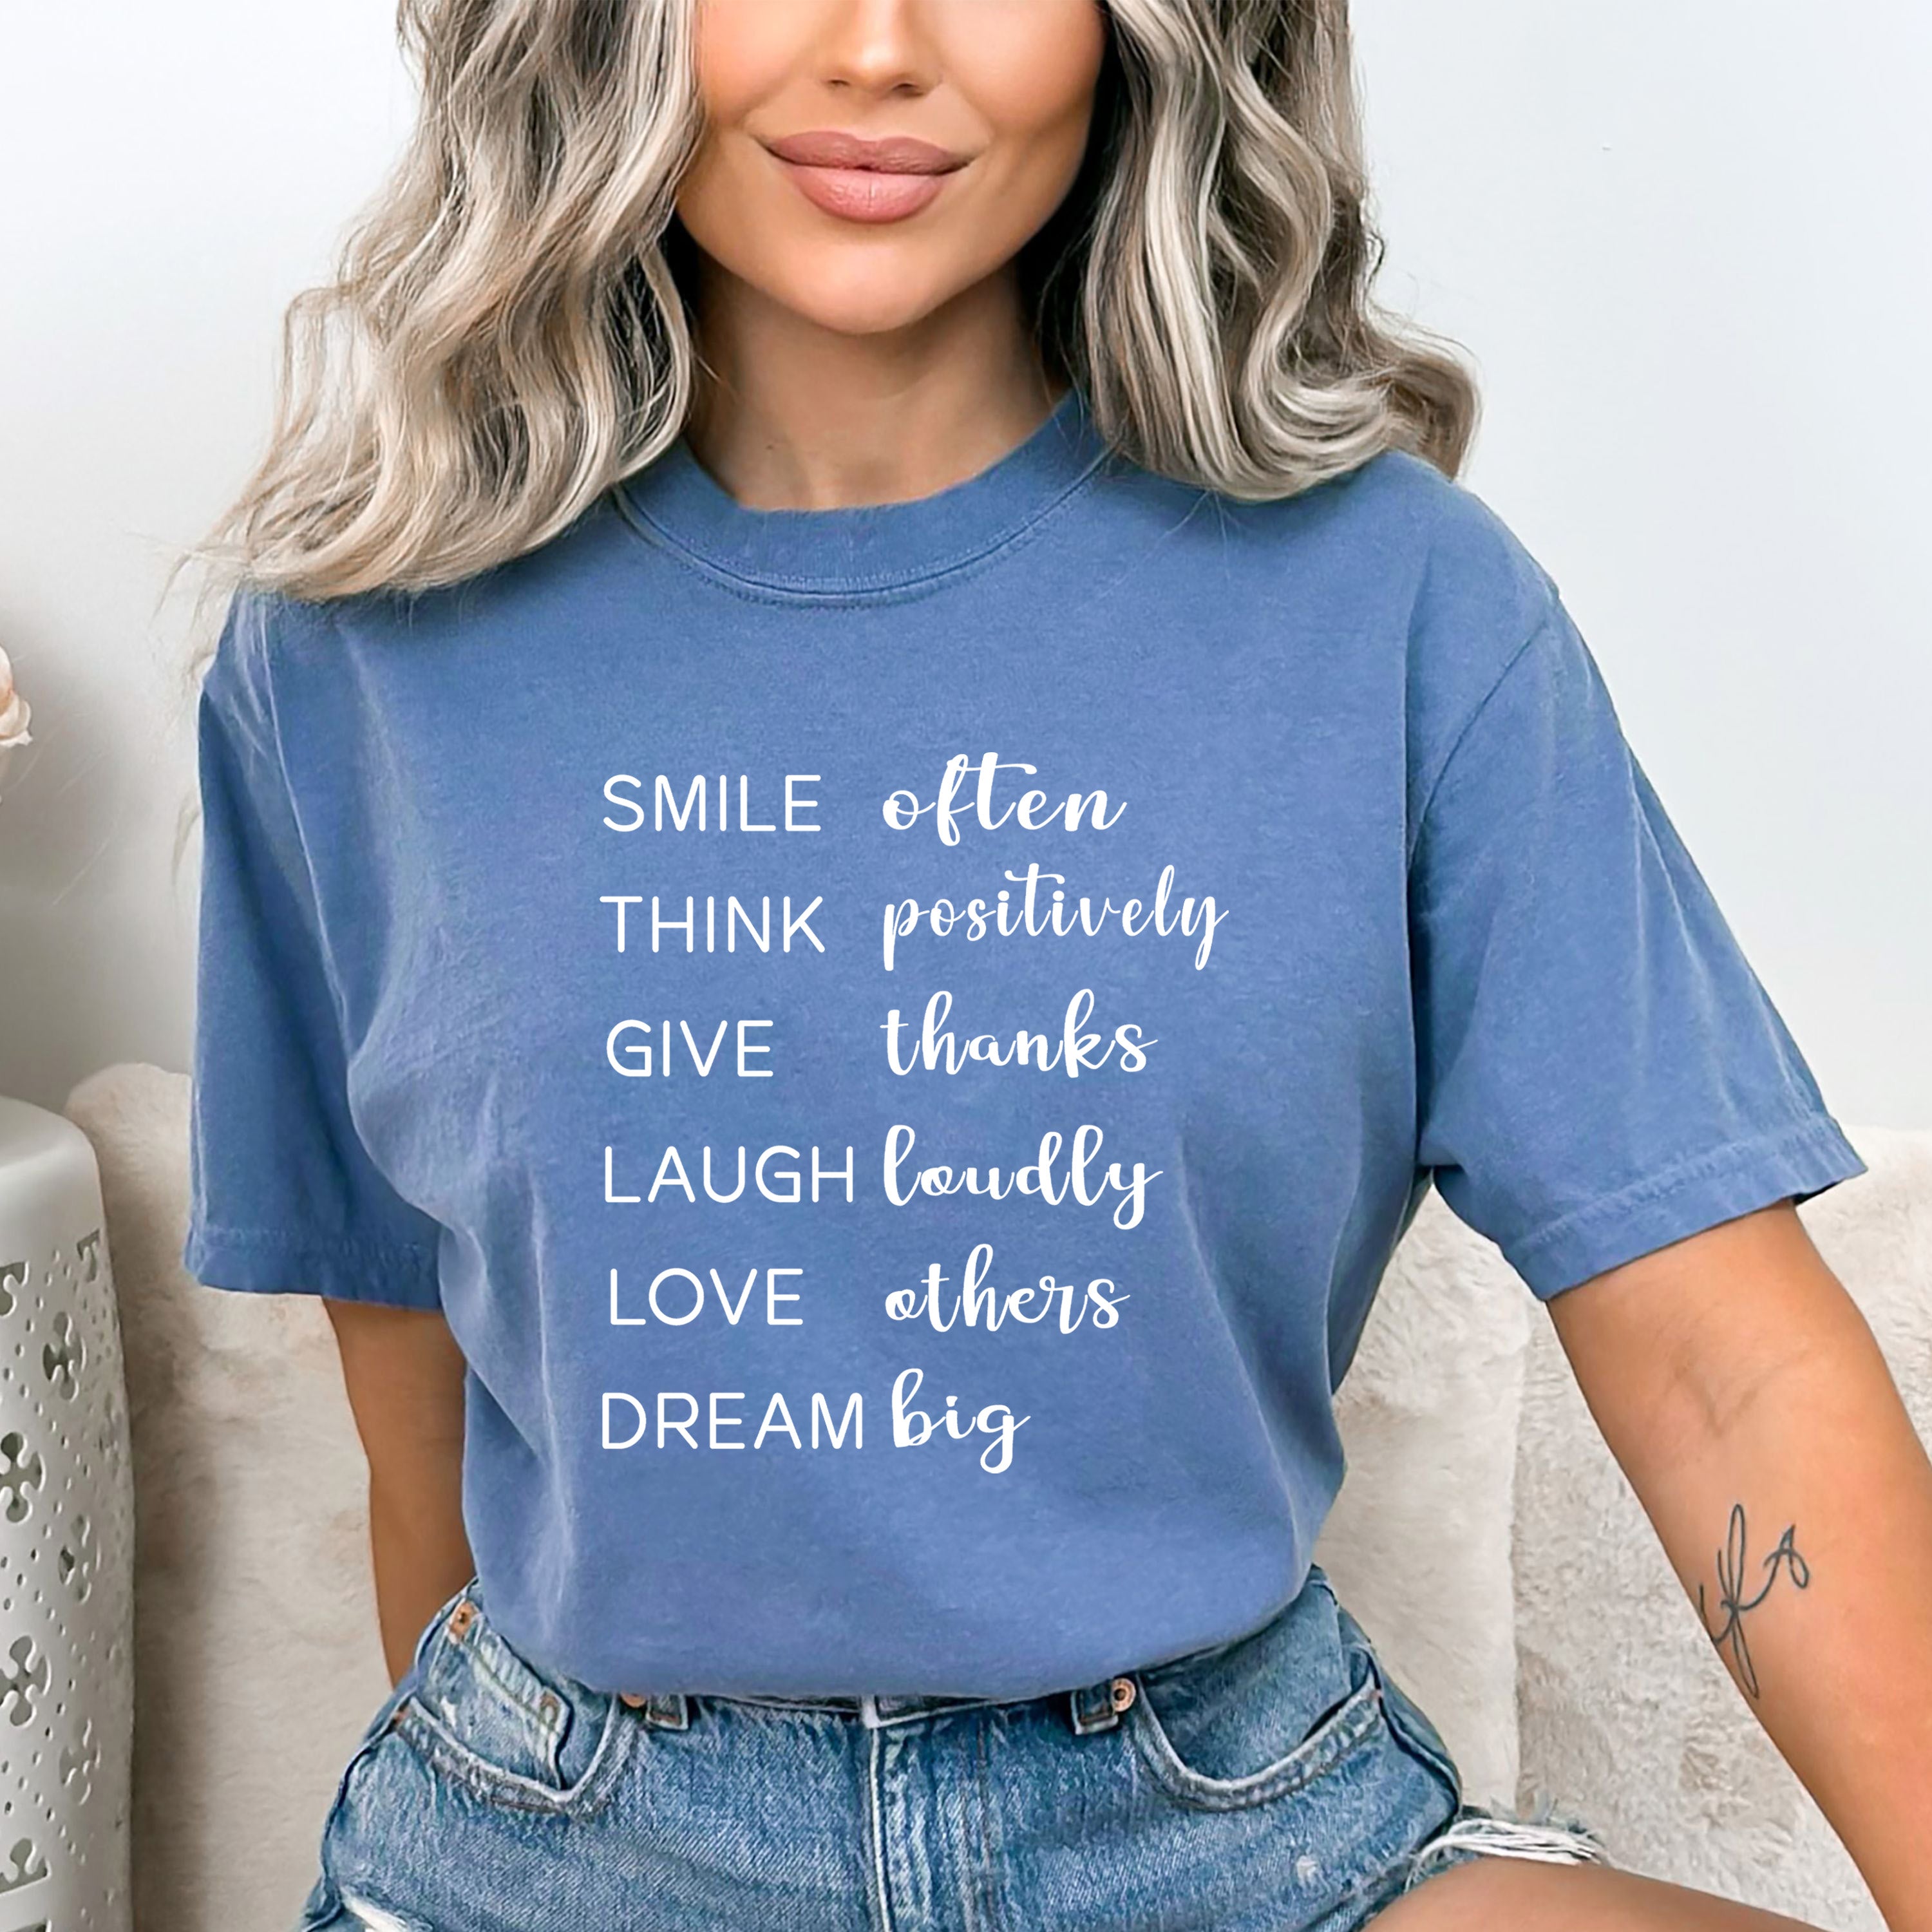 Give Thanks Laugh Loudly - Bella canvas